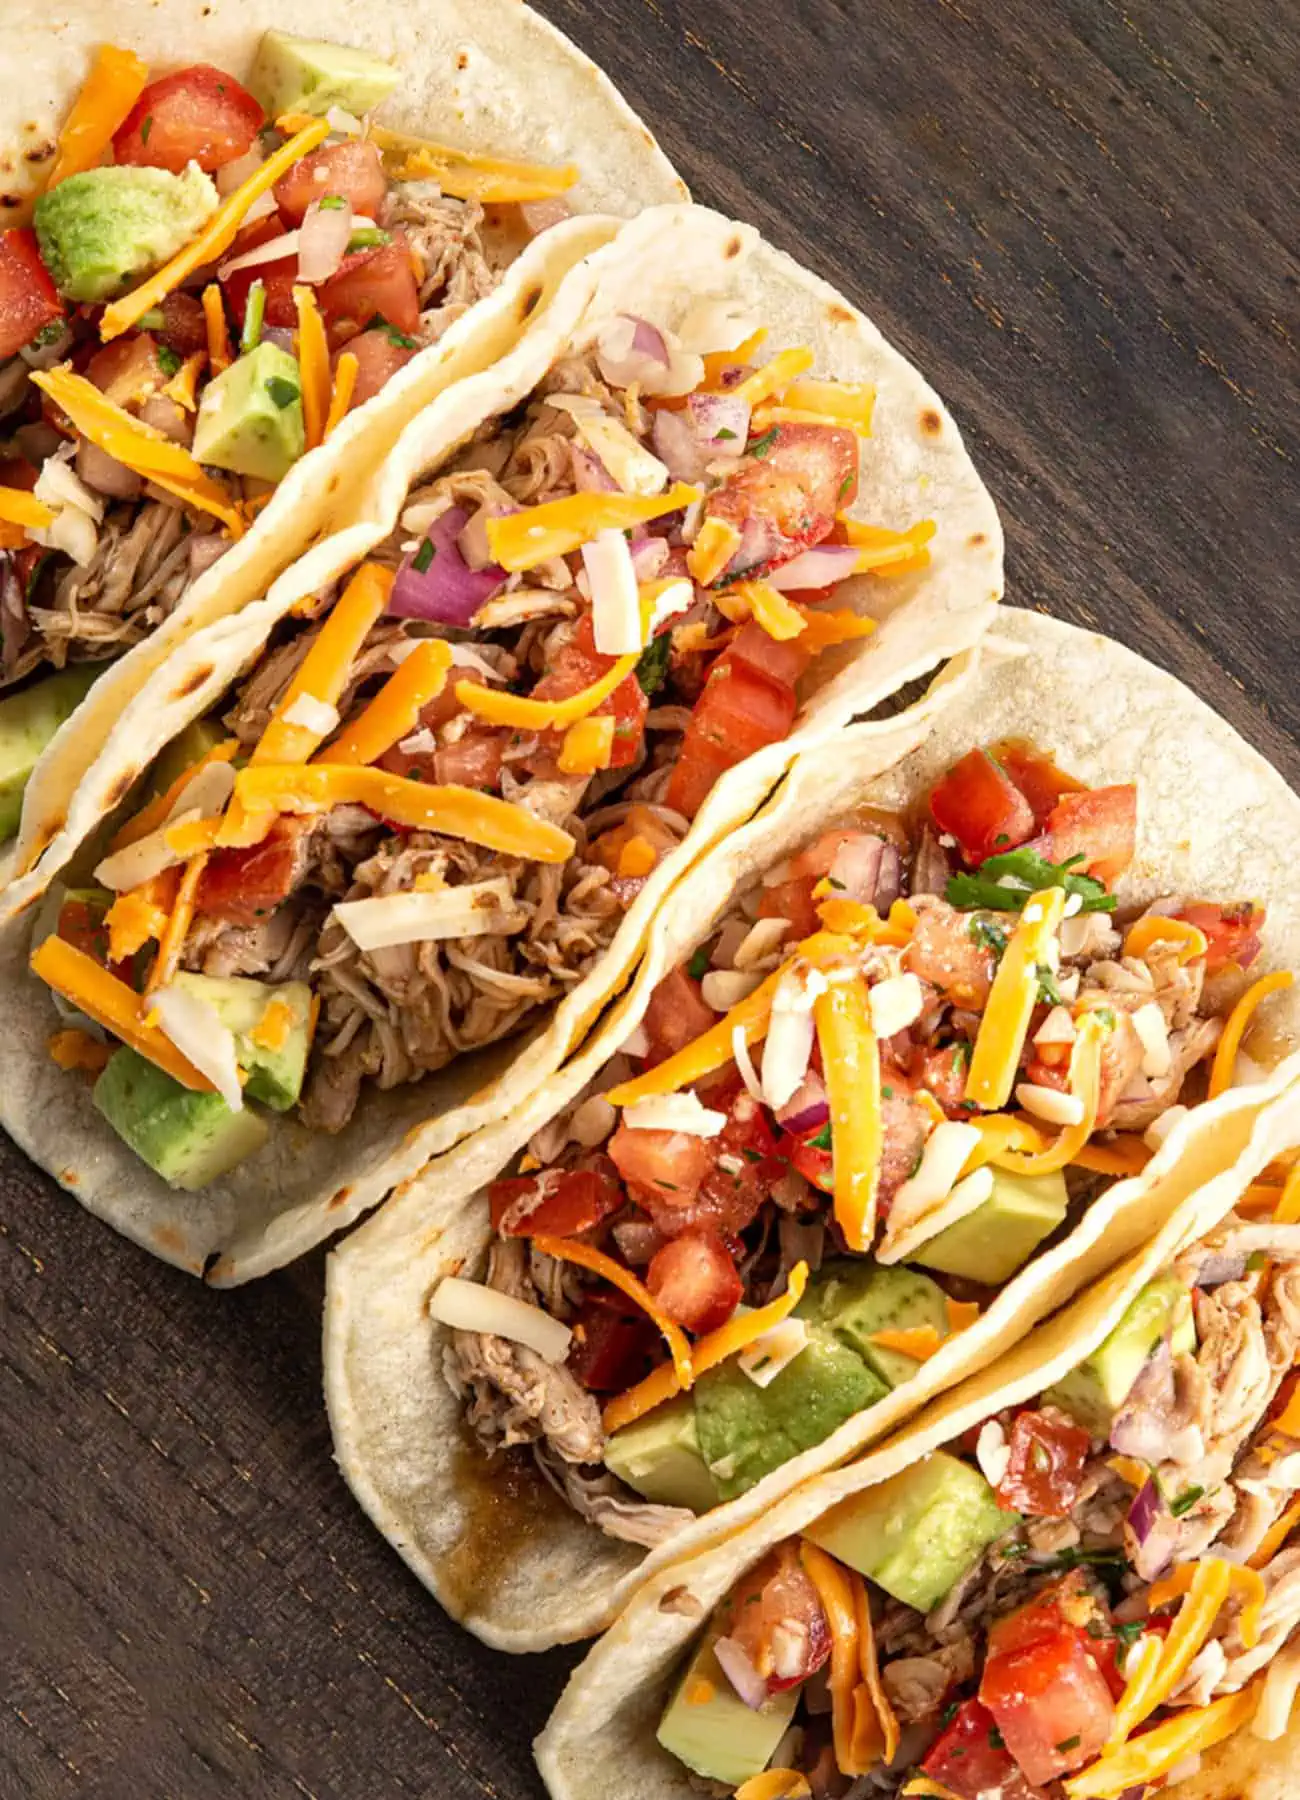 Chicken tacos loaded with delicious toppings on a wooden surface.